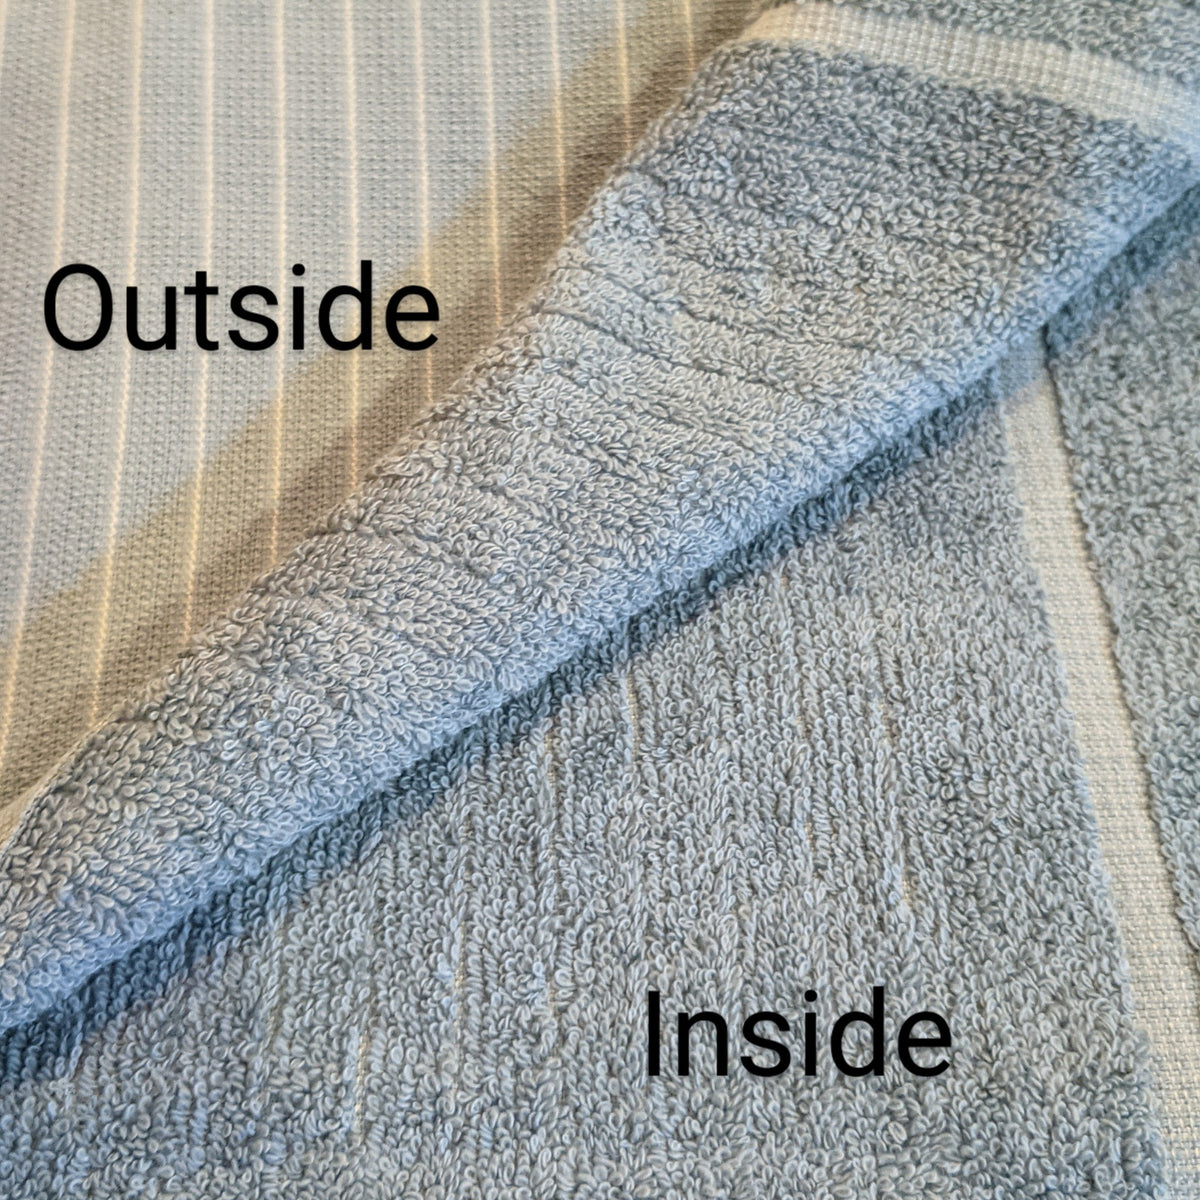 terry inside and flat woven outside layers of bathrobe fabric 